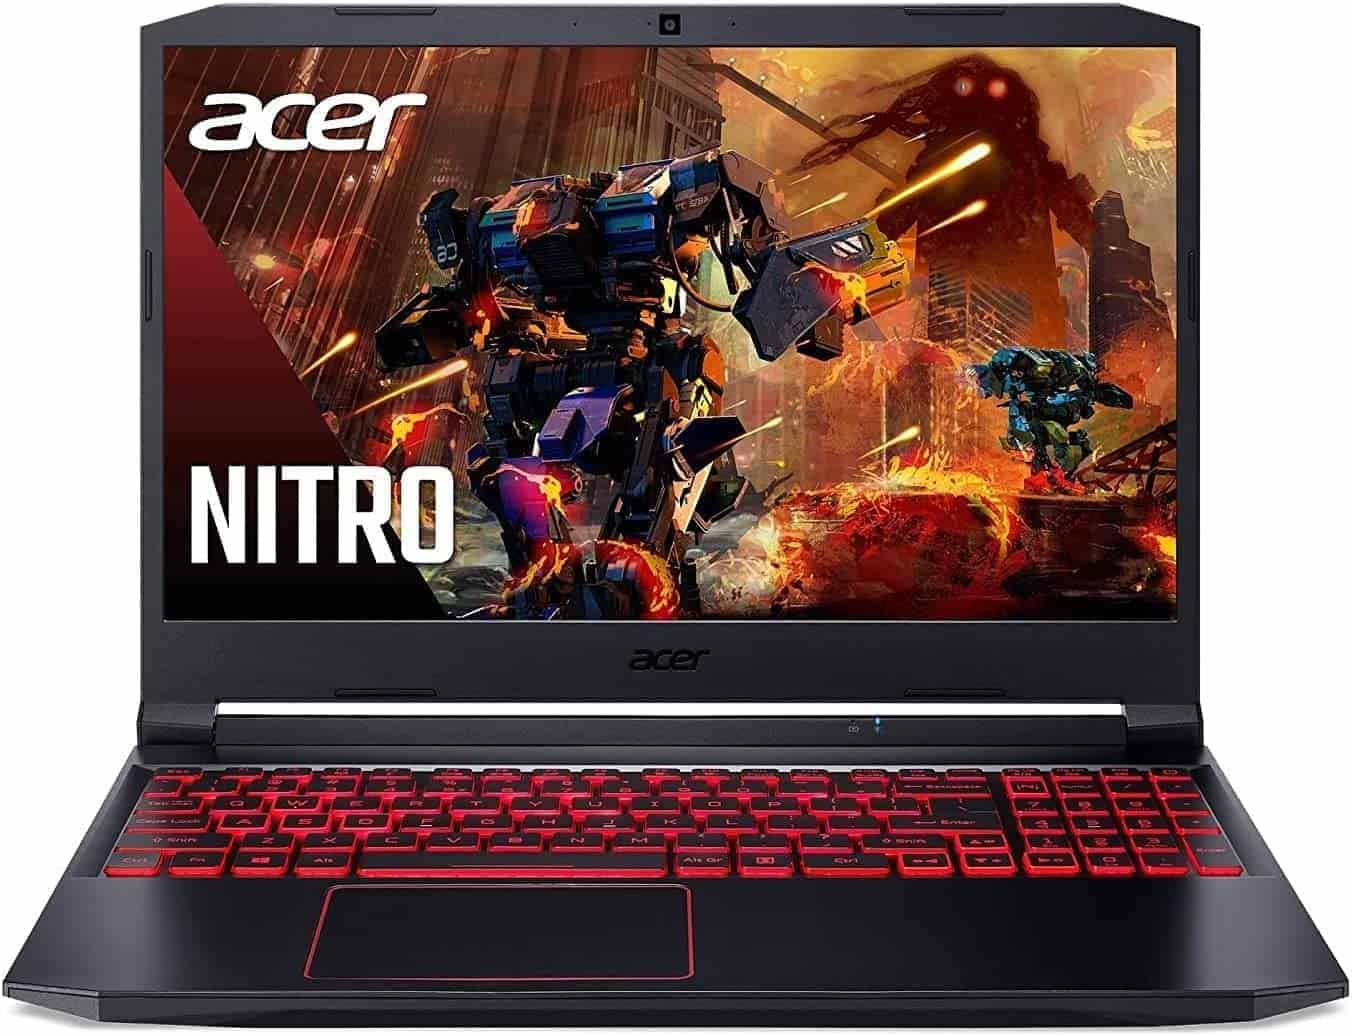 Best Acer gaming laptop is the Acer Nitro 5